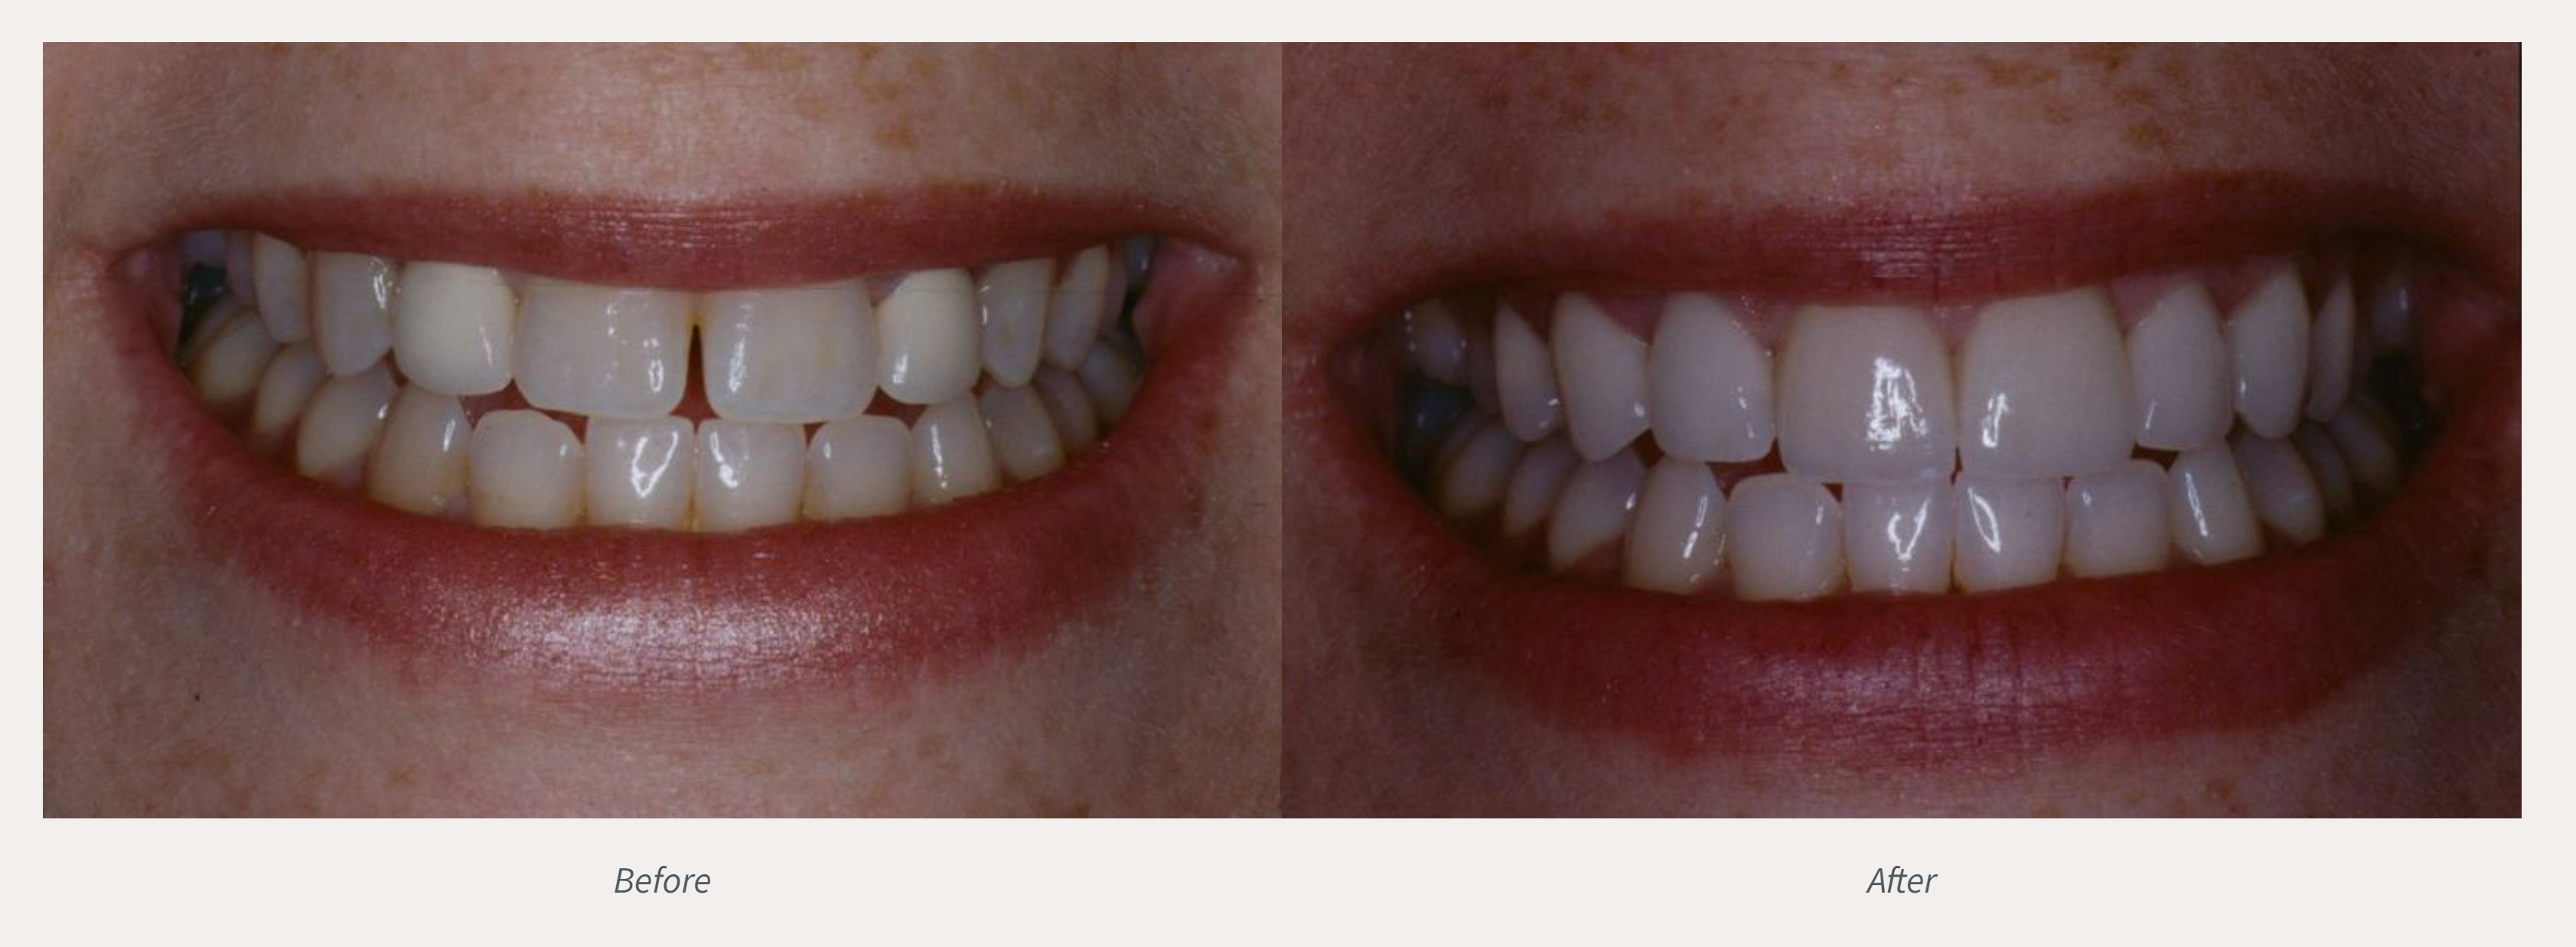 Teeth Whitening Before & After from Advanced Dental Care | Valdosta, GA